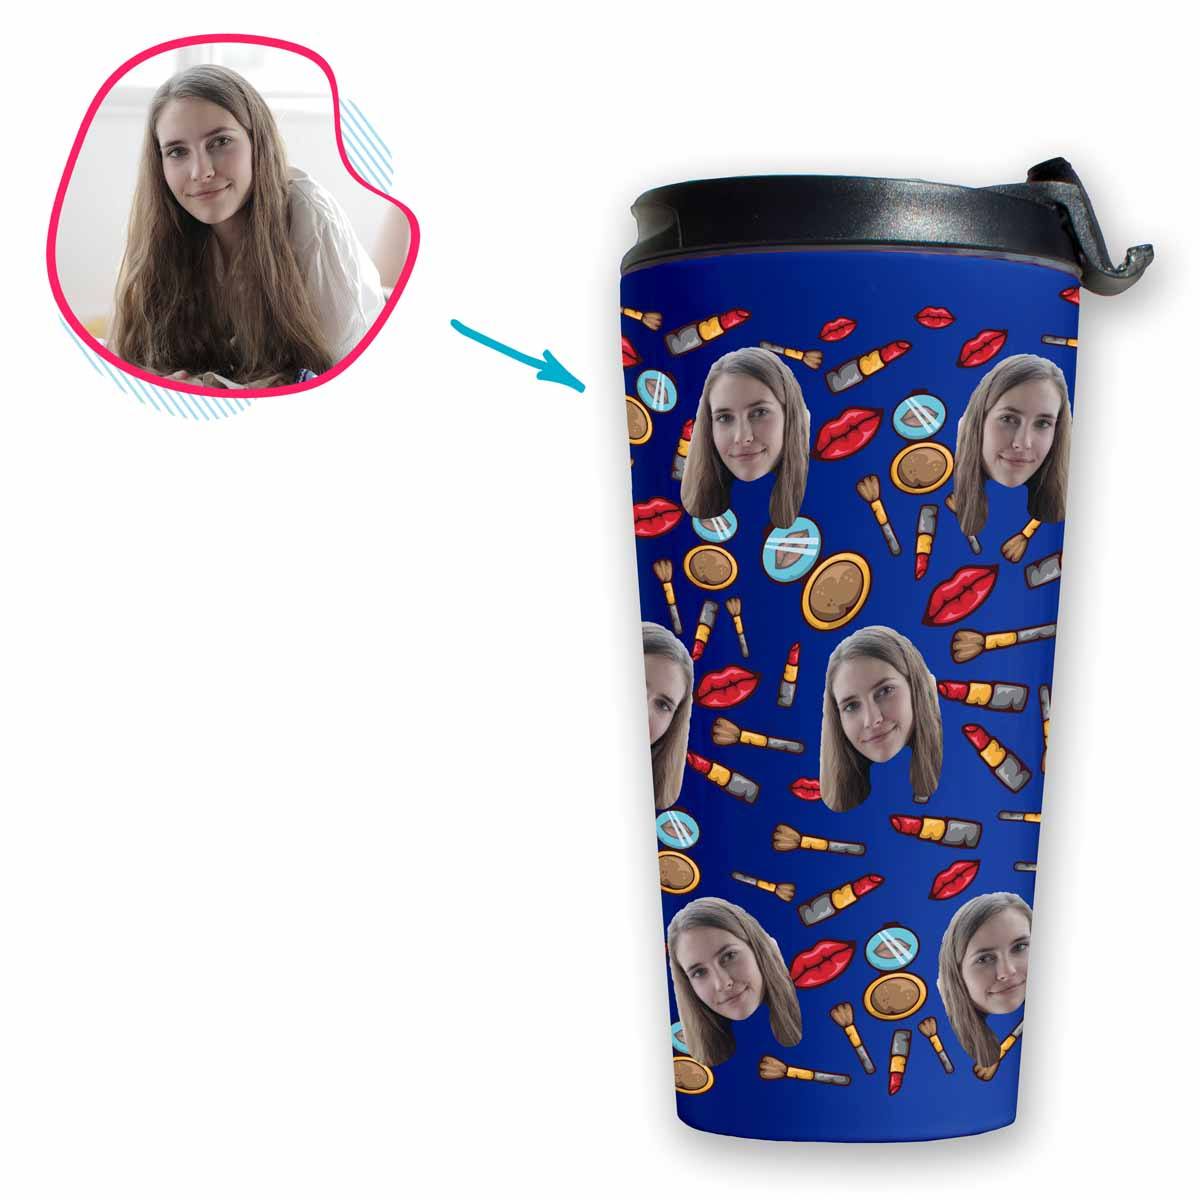 Darkblue Makeup personalized travel mug with photo of face printed on it